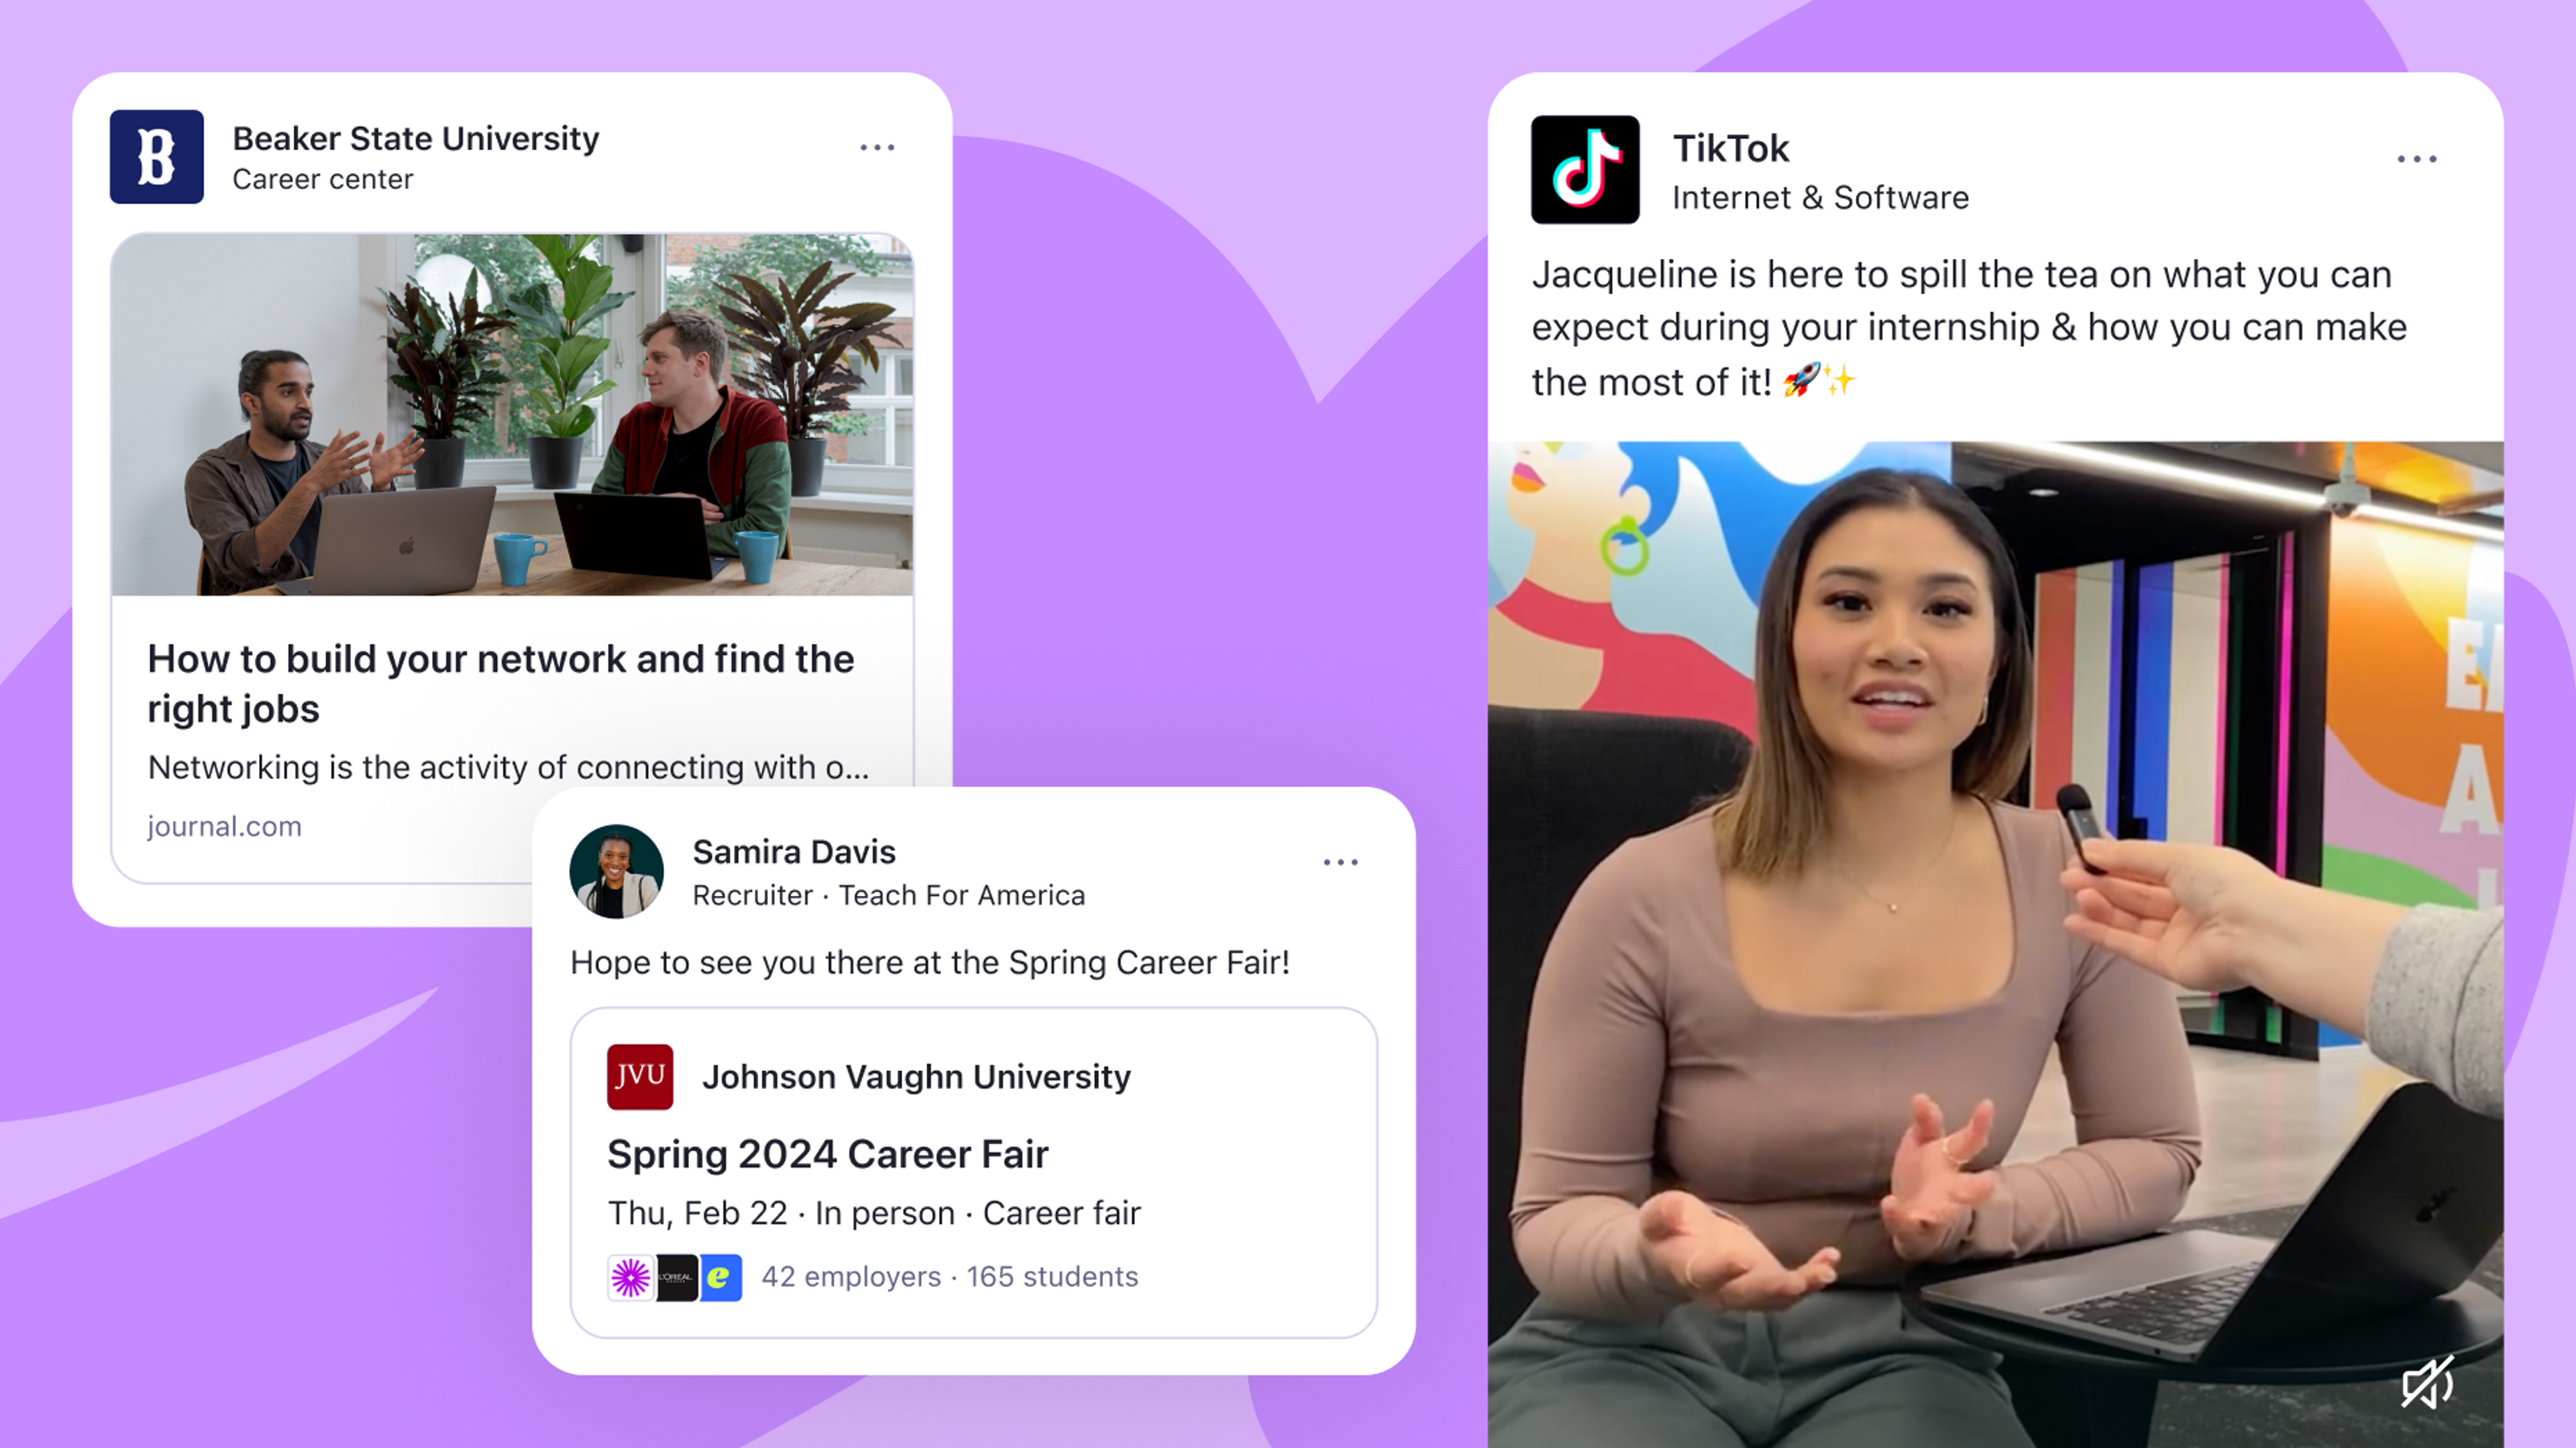 Samples of content from a university career center, a recruiter at Teach for America, and TikTok are shown against a lilac background